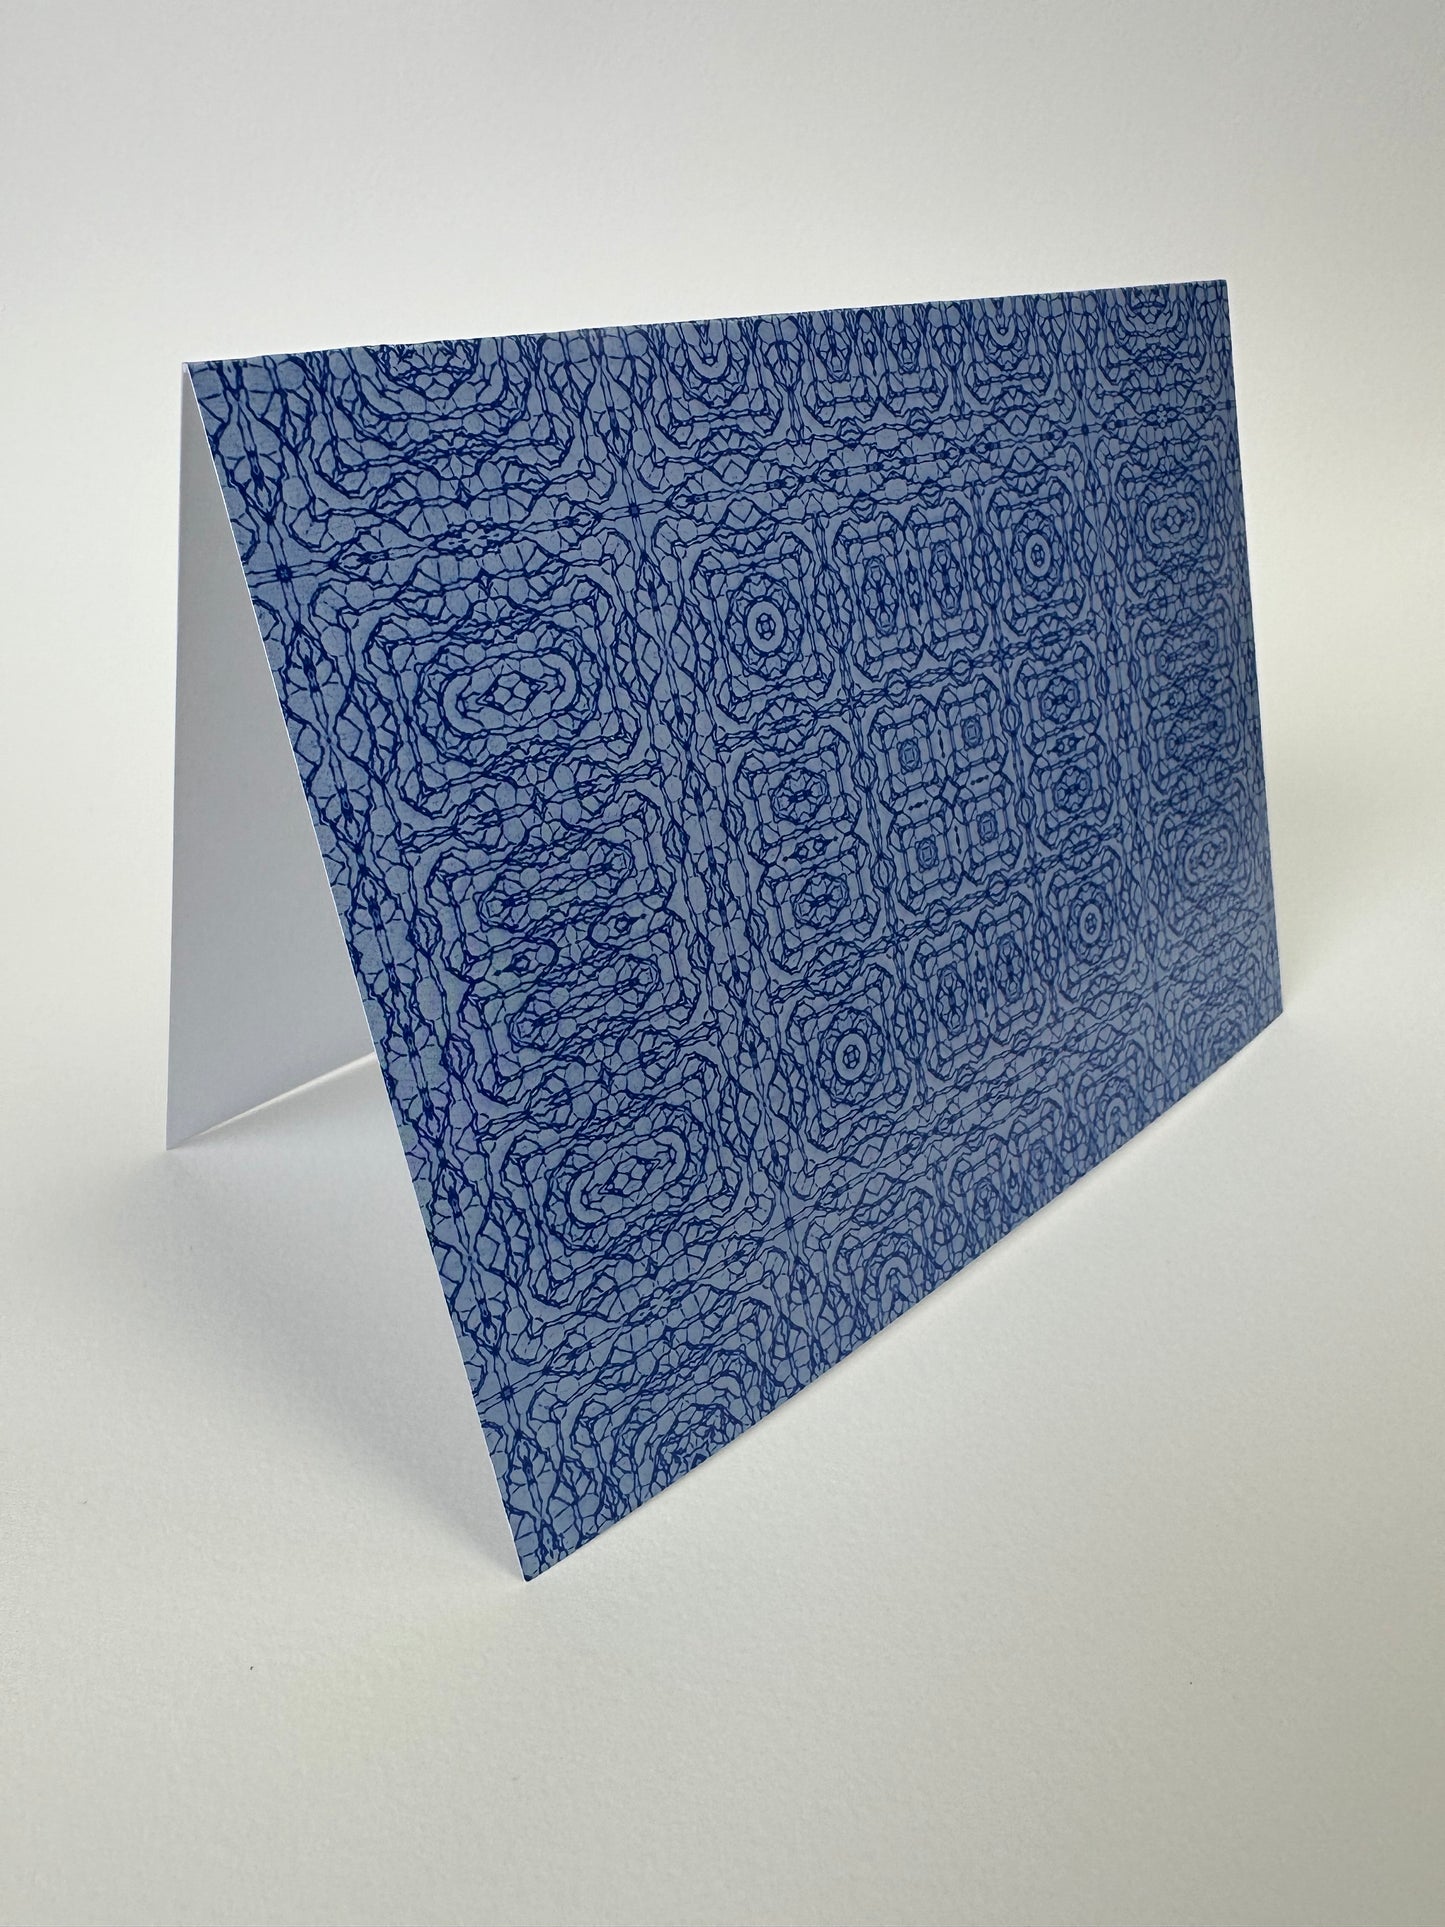 Knit Print cards - Repeating Patterns